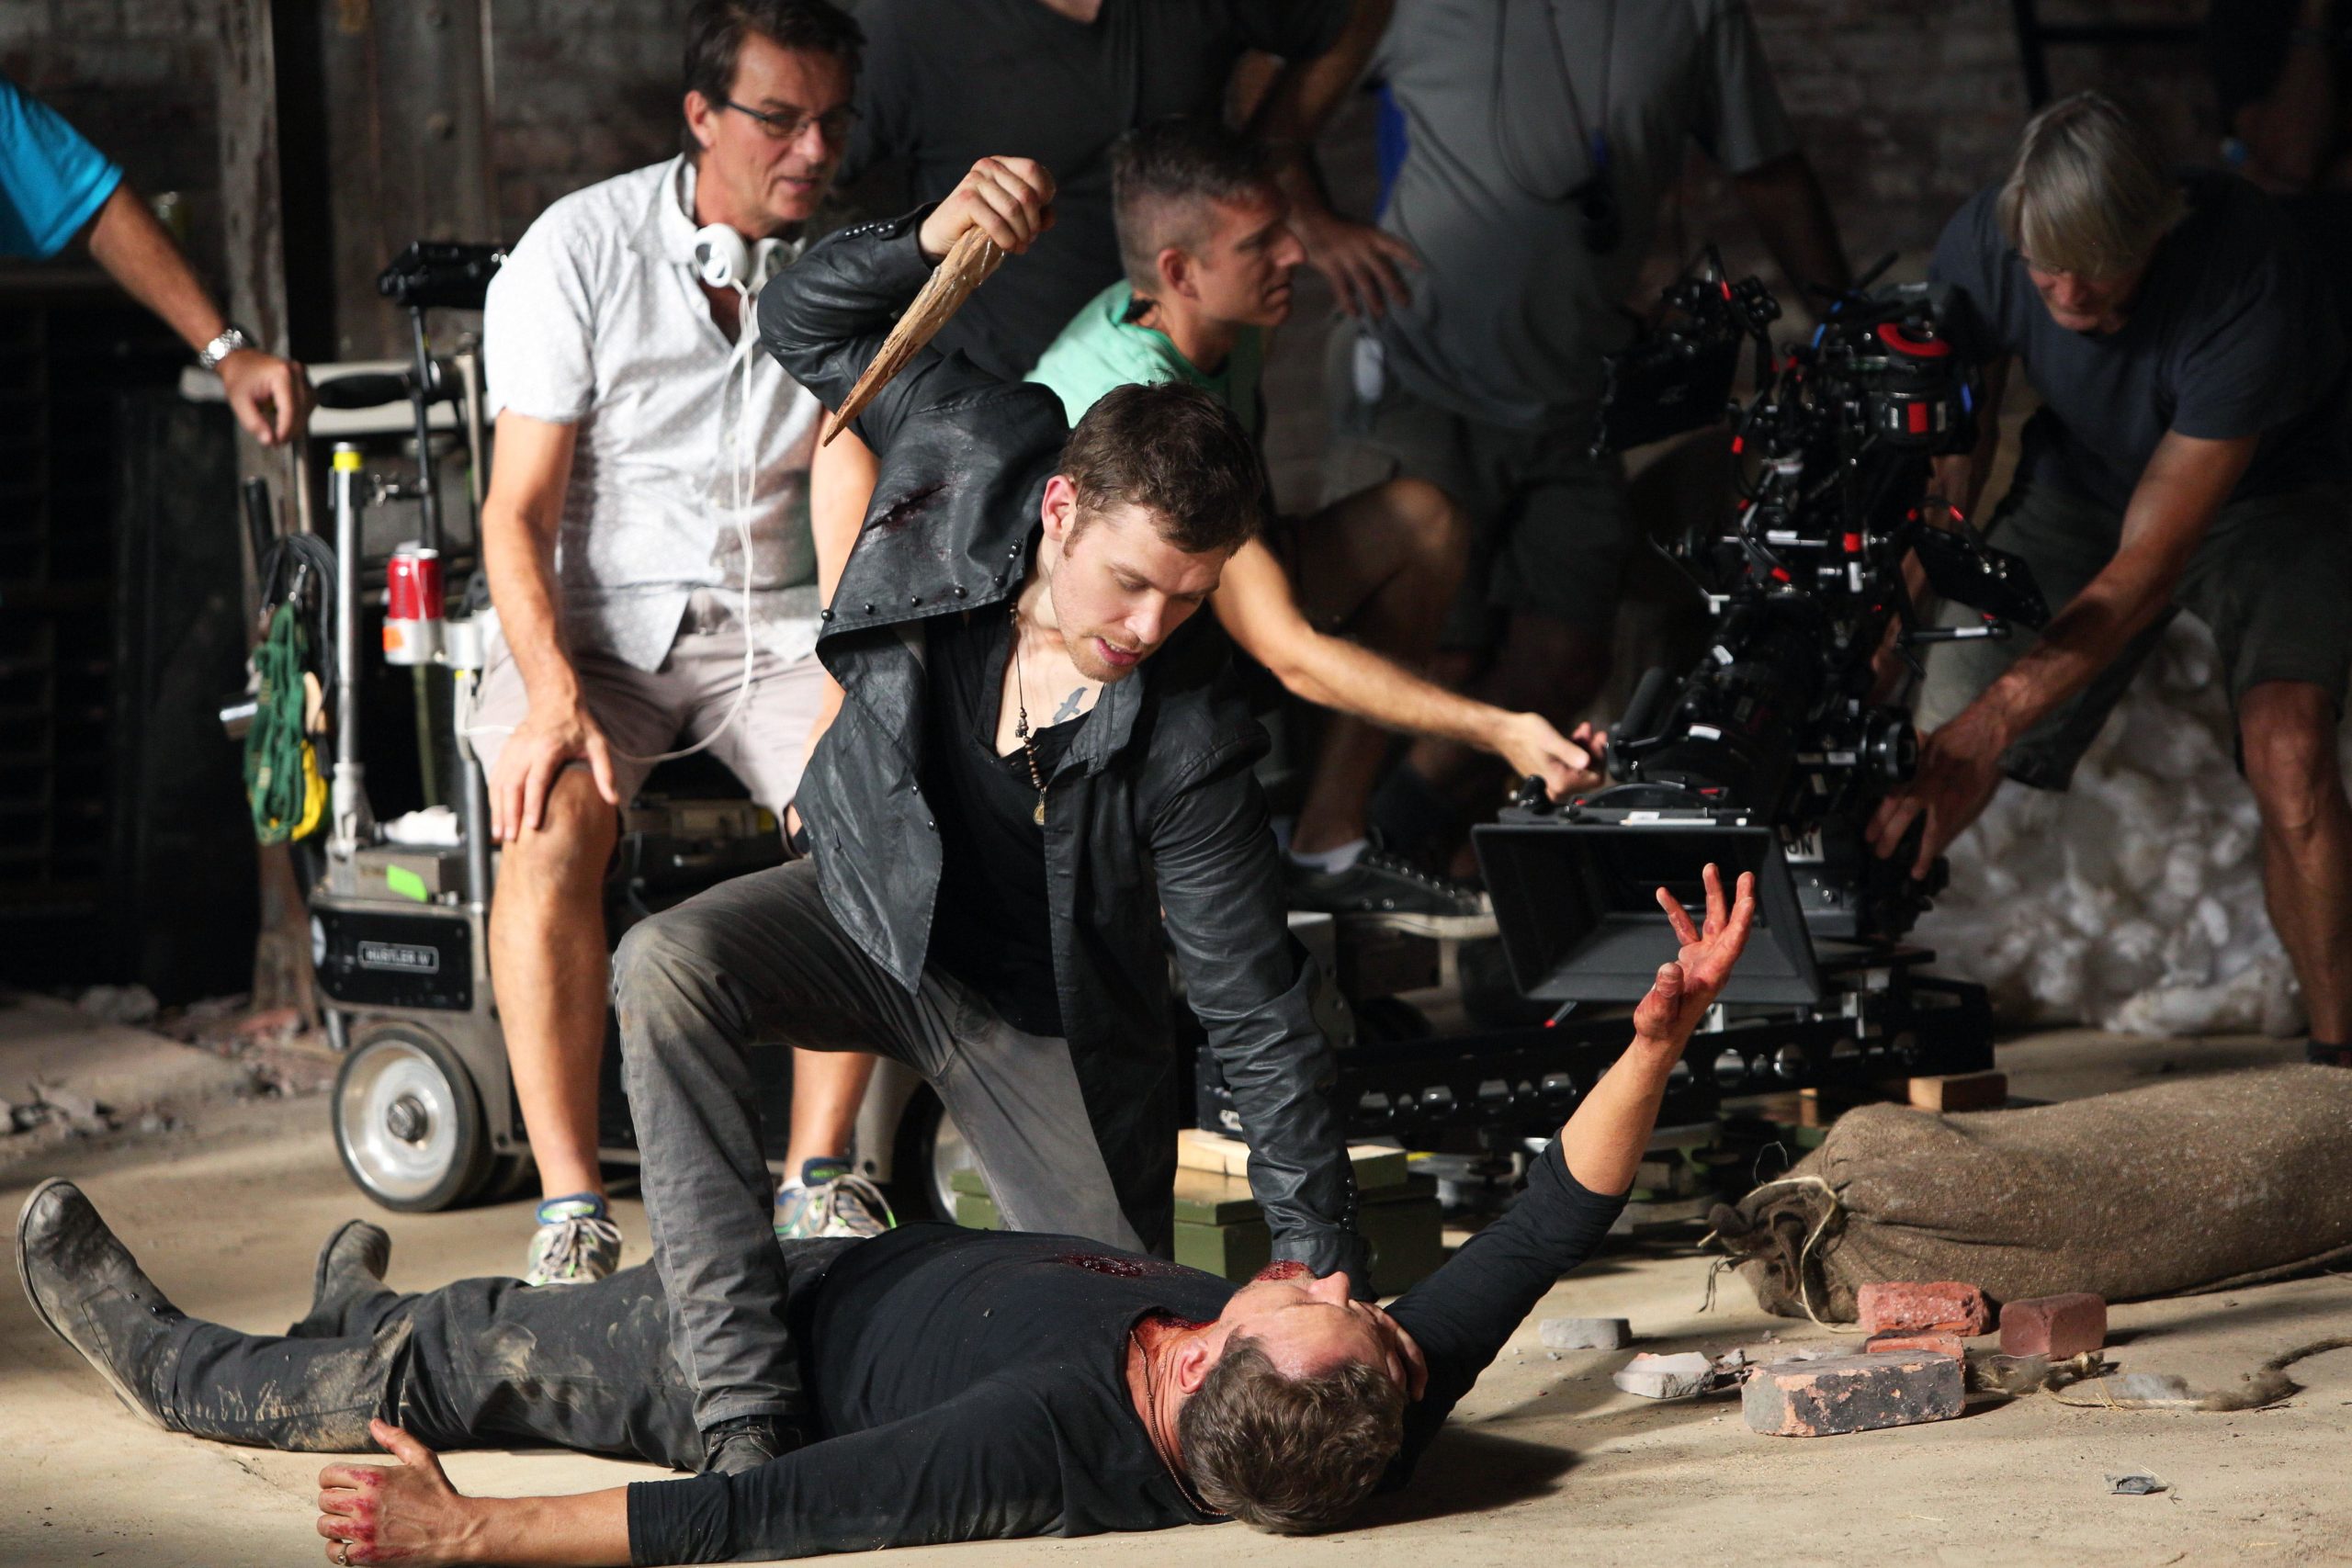 The Originals': (Fake) Blood, Knife Fights and Murder Behind the Scenes  (PHOTOS)